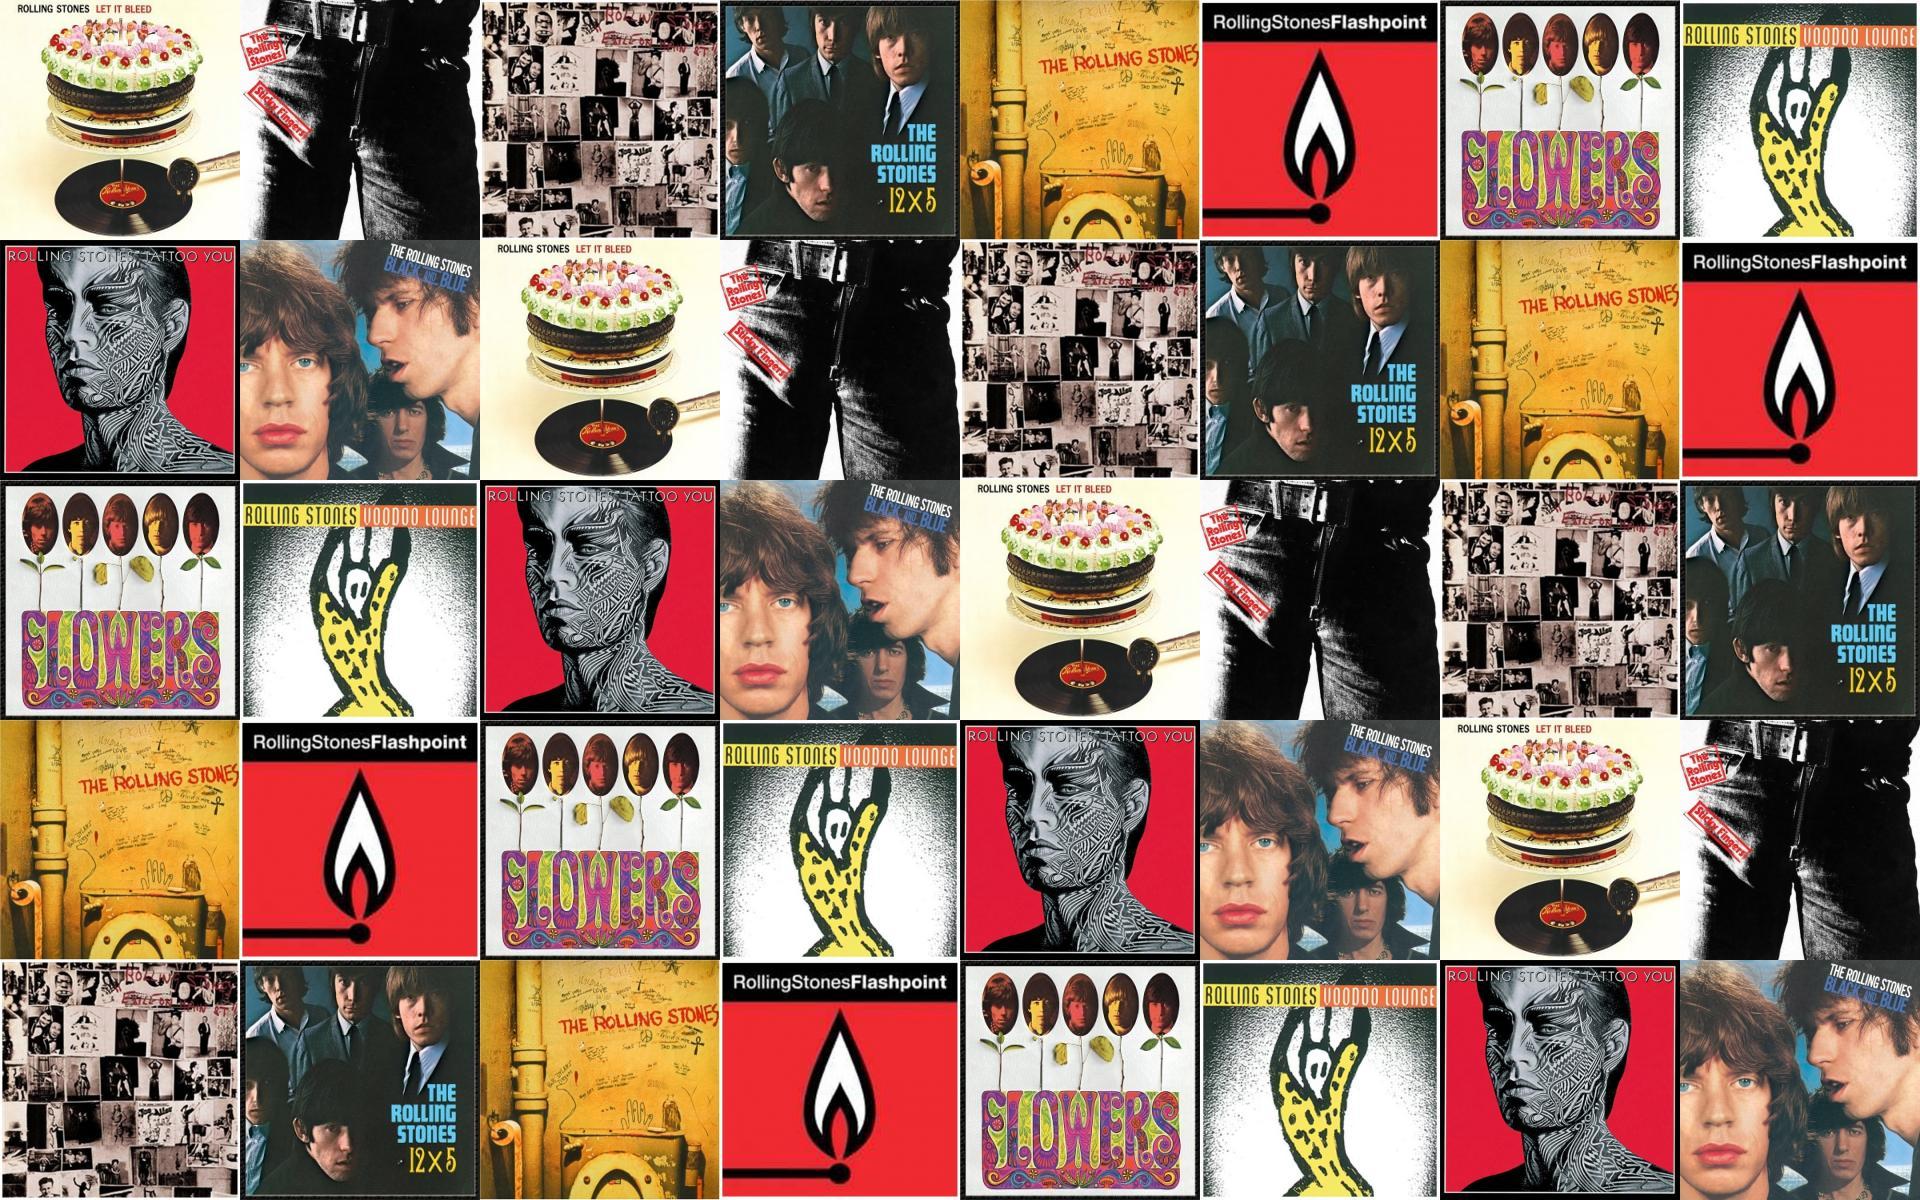 The Rolling Stones - Sticky Fingers (2009 Remastered Version) [Full Album] - Rolling Stones